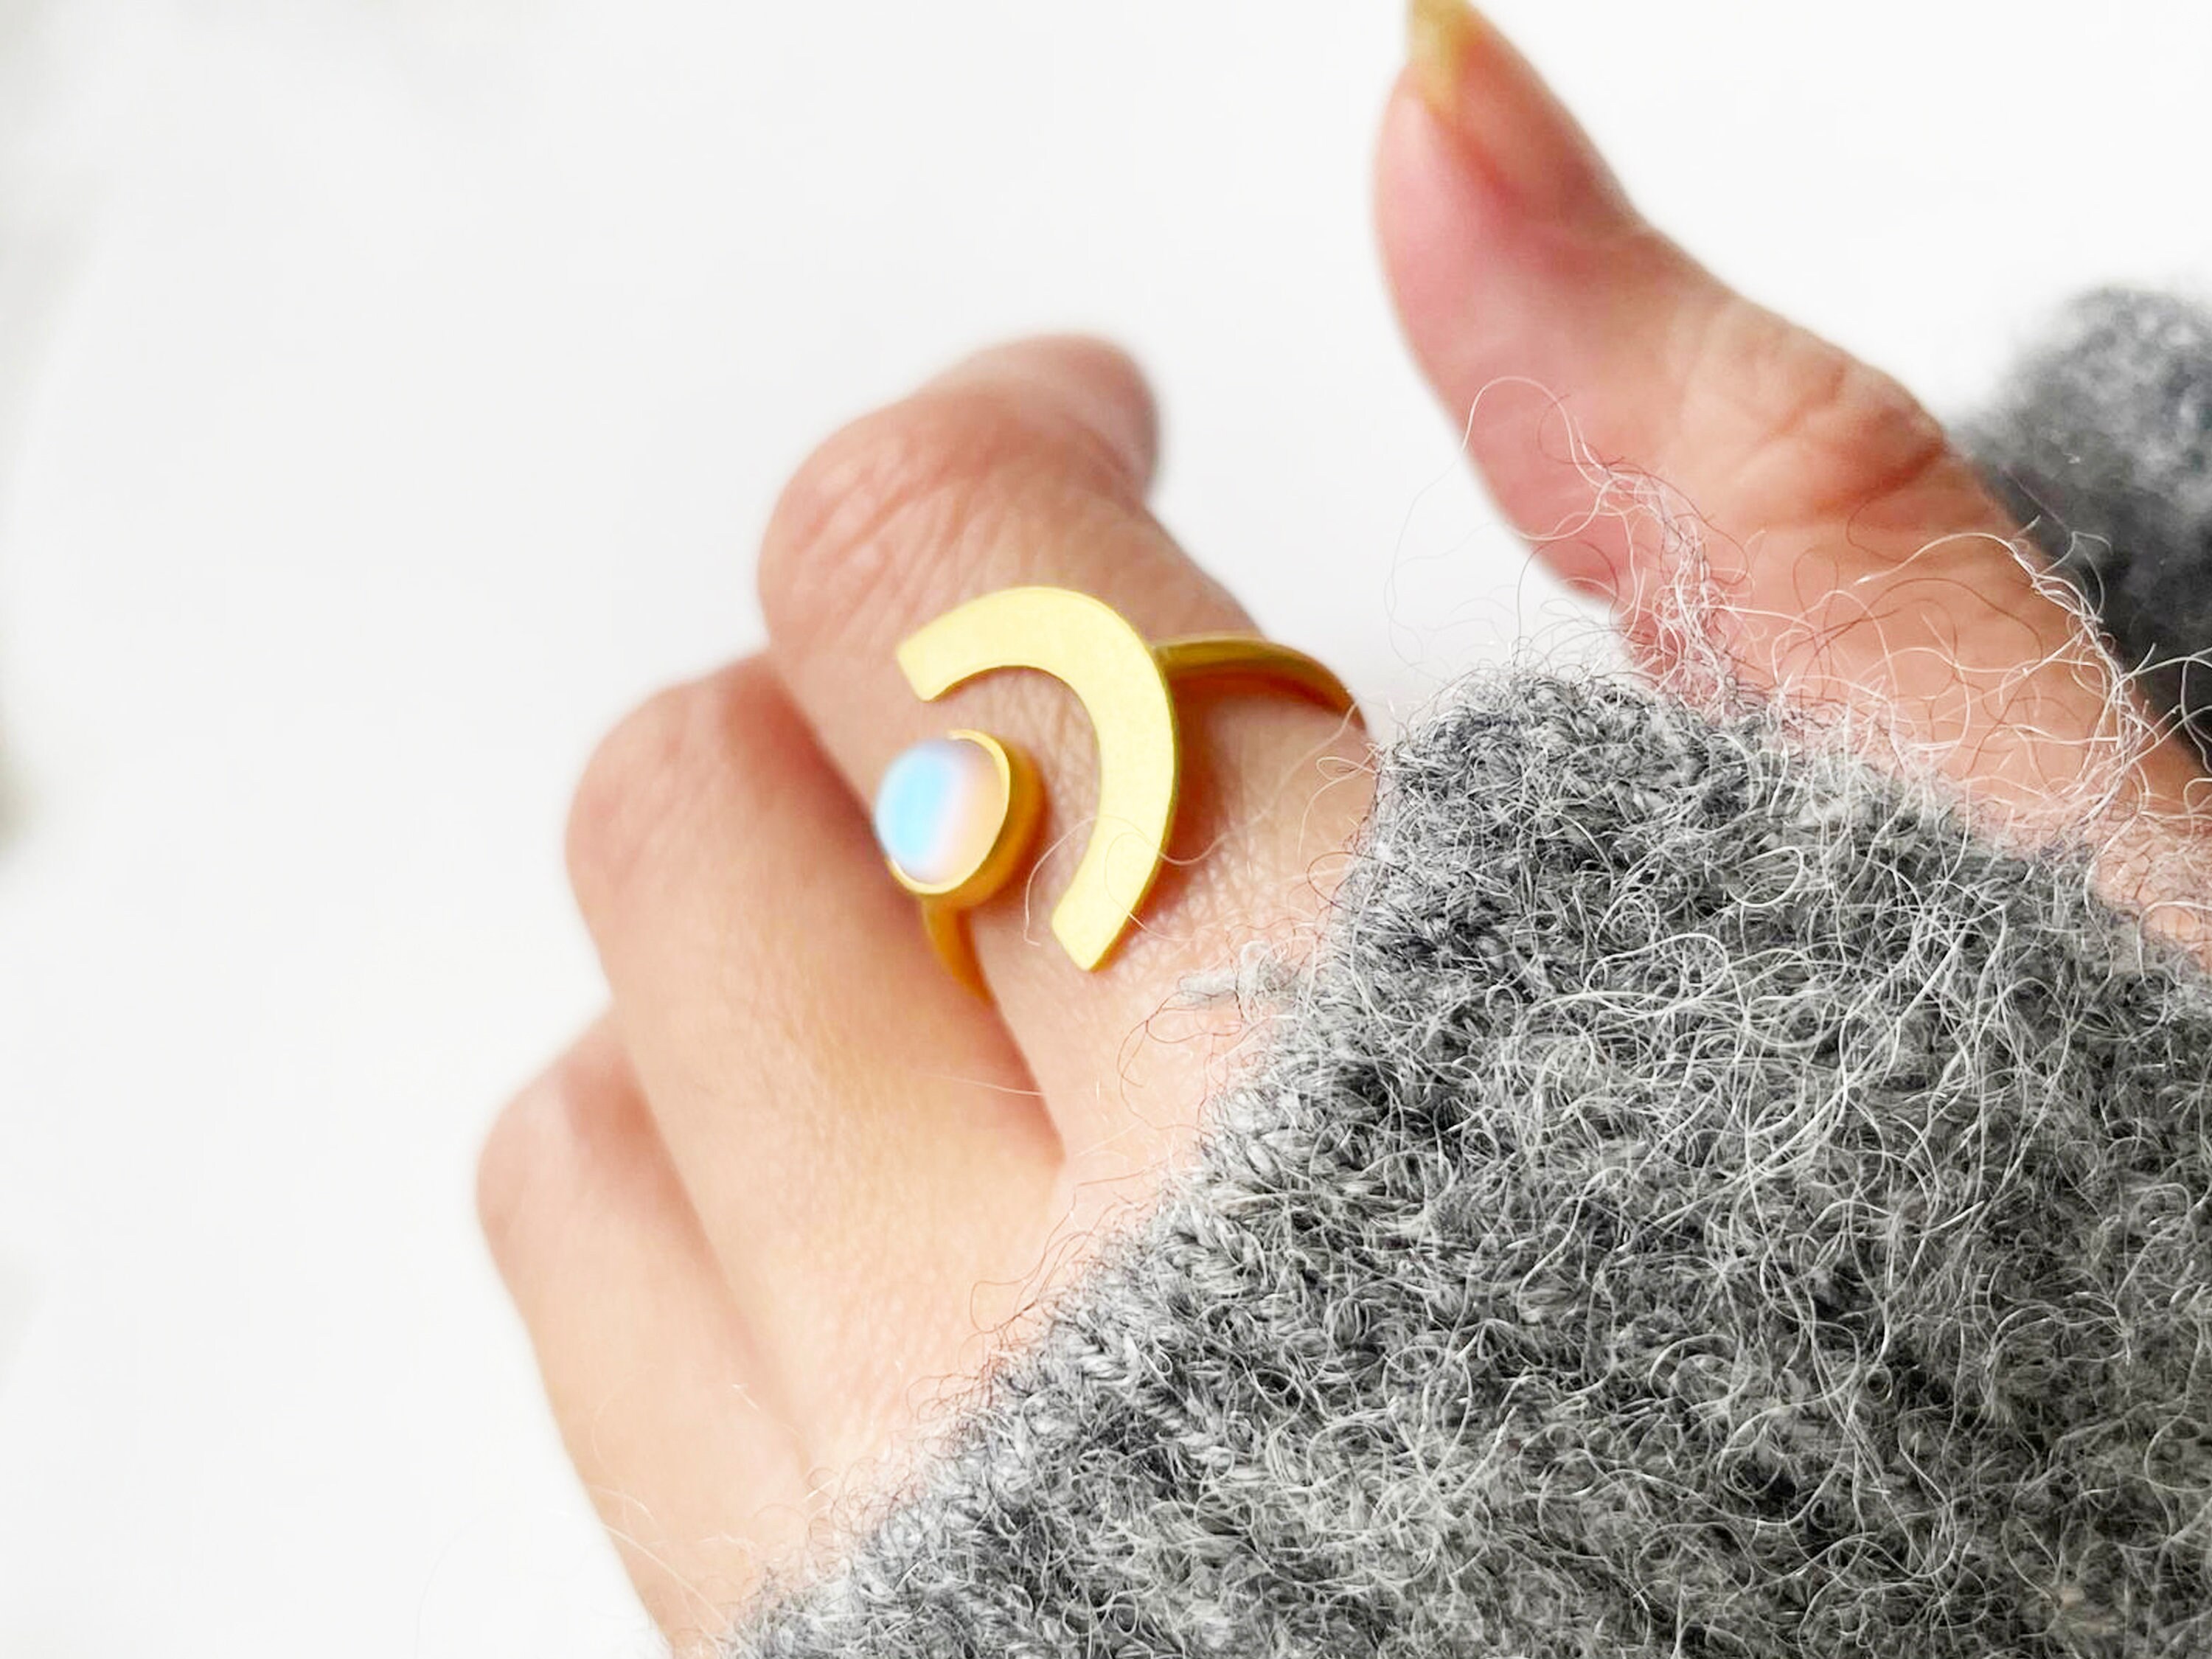 14K Solid Gold Moon Ring, Crescent Moon Ring, Tiny Moon Ring, Gold